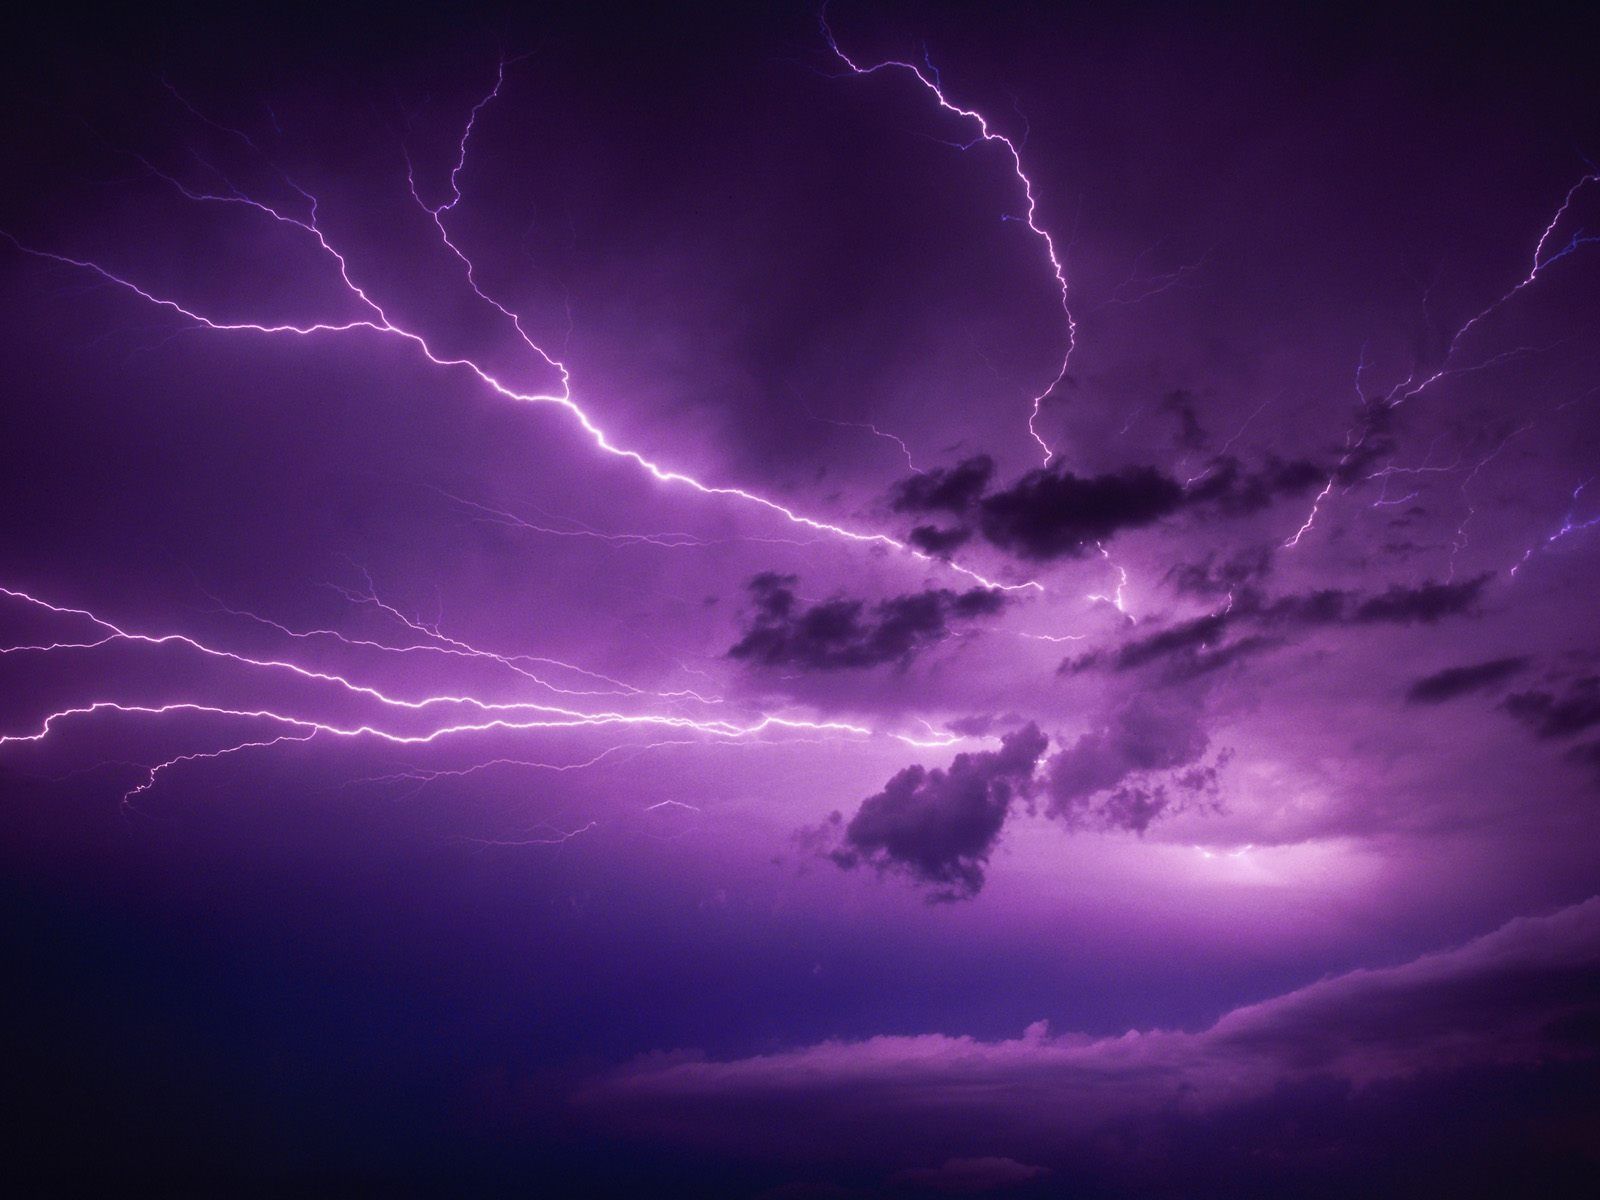 Thunder and Lightning Clouds. Thunderclouds. Purple lightning, Thunder and lightning, Purple sky